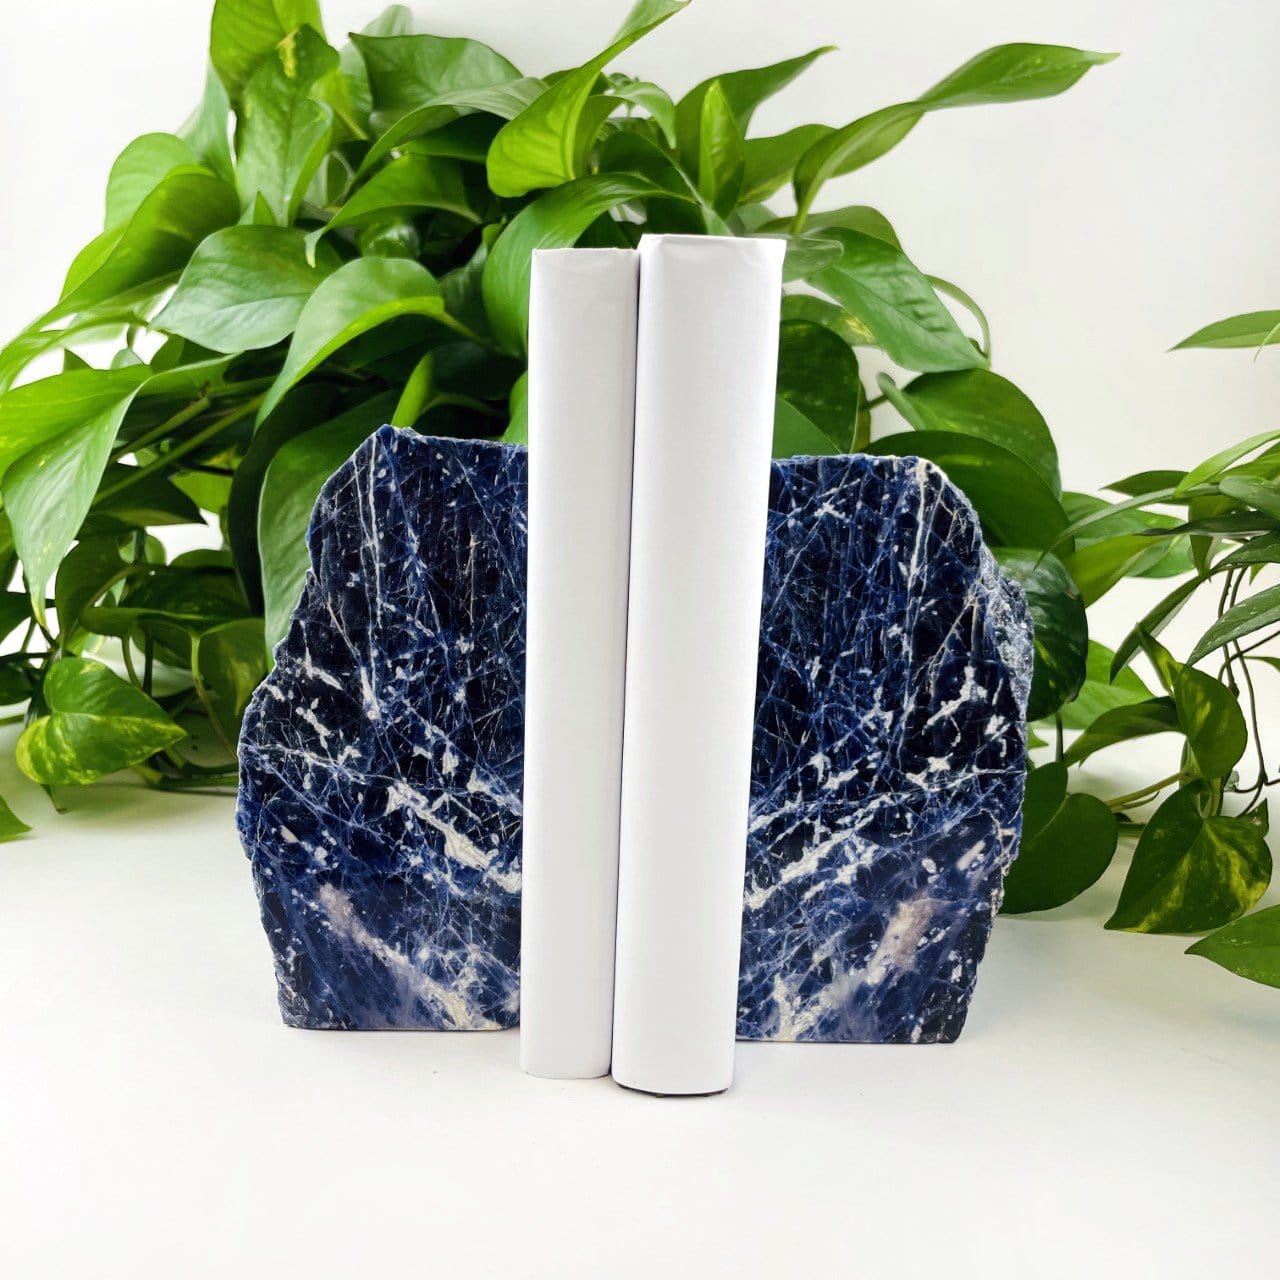 Polished Sodalite Bookend Set displayed with 2 books in between